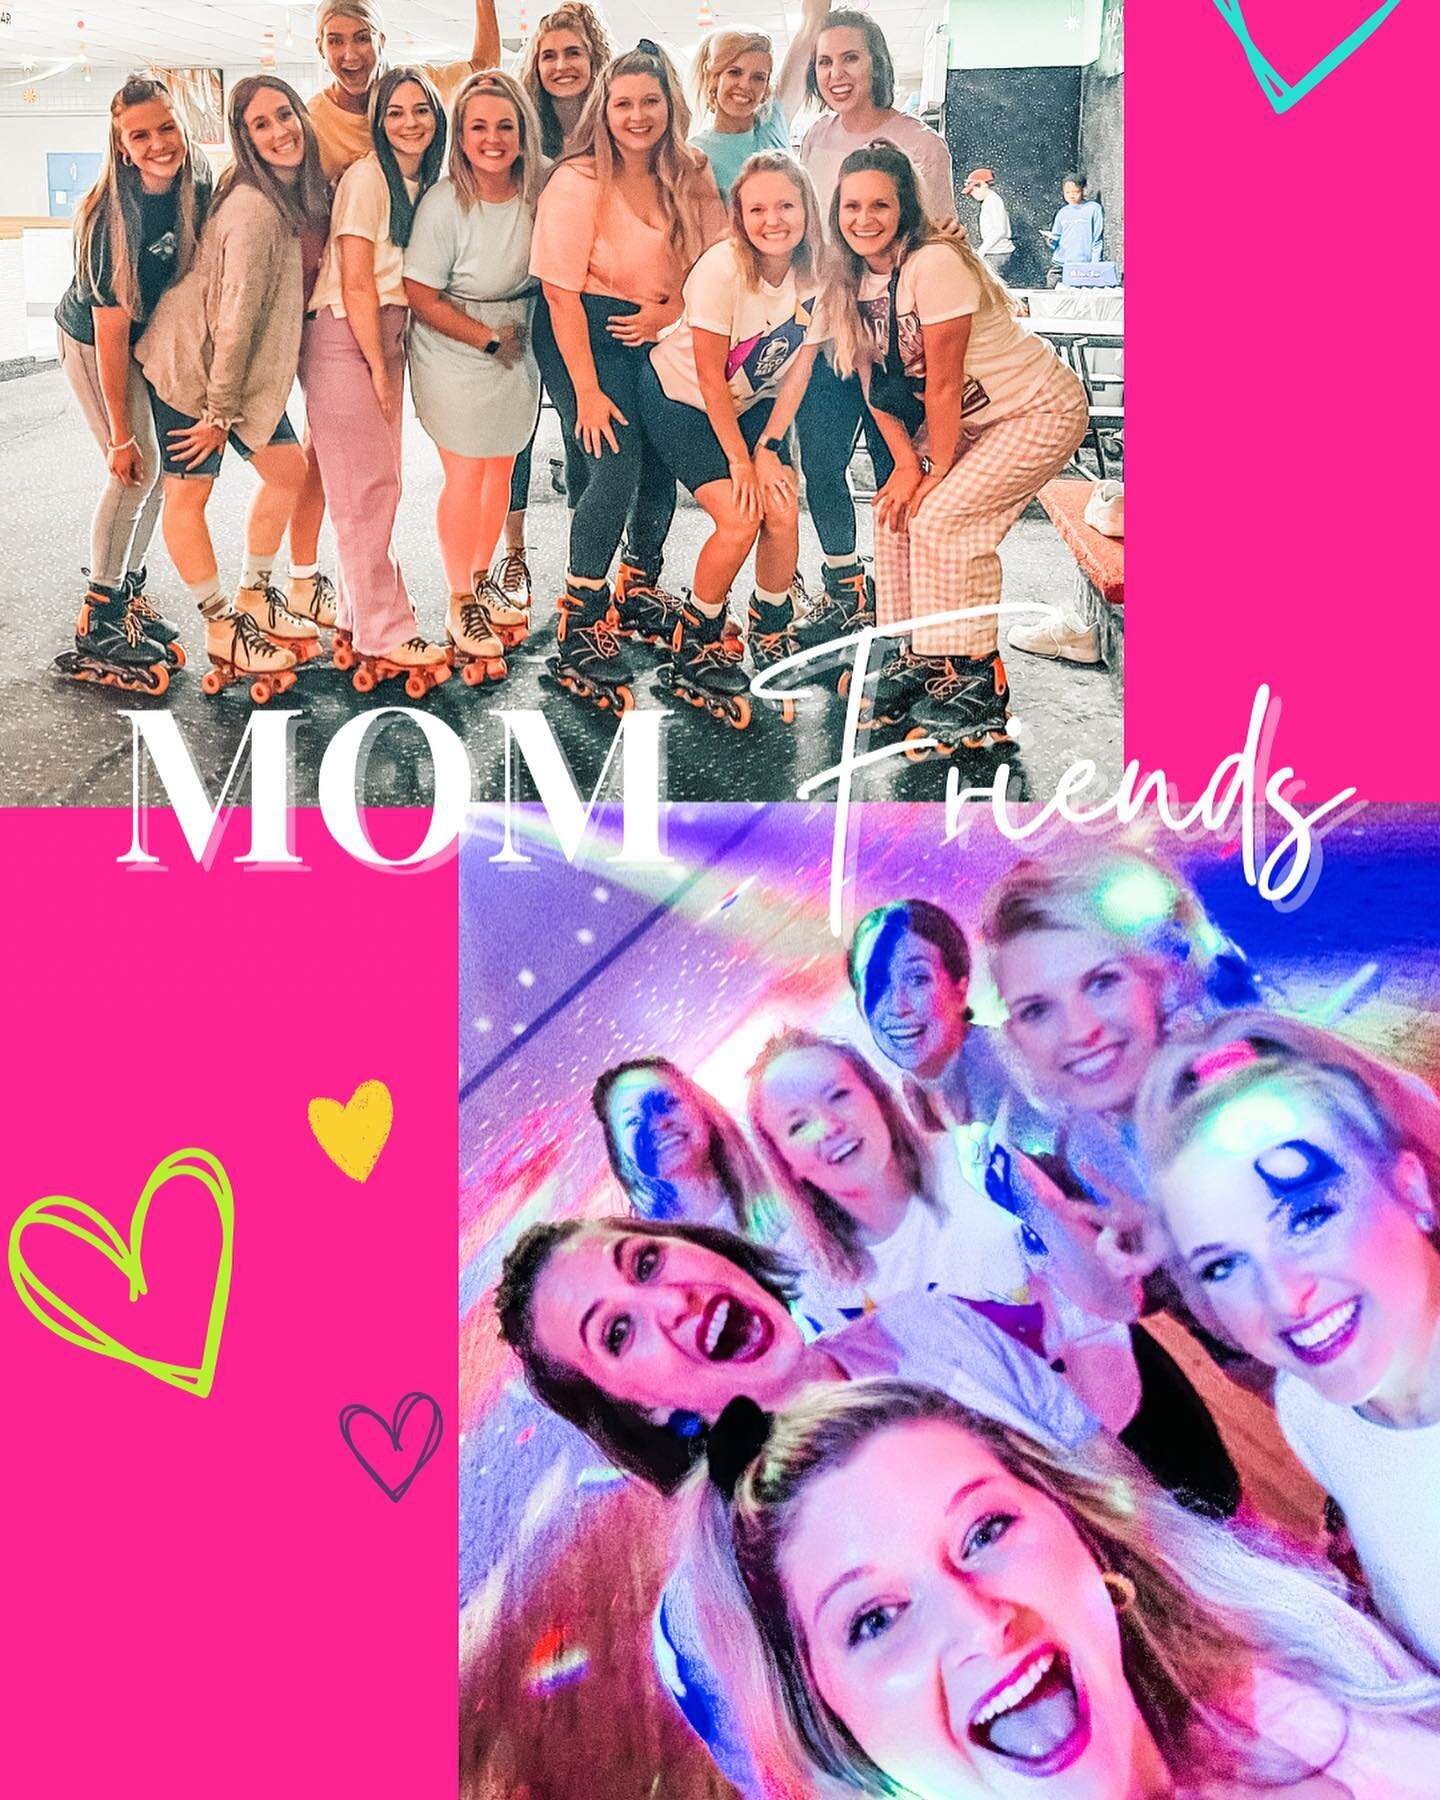 ⚠️ PSA: Find friends that will dress up in 80s ensembles and go roller skating with you last minute on a Wednesday night. 🛼 Thank me later. 💗

#fortworthmoms #rollerskatingfun #rollerland #rollerlandwest #80sstyle #momsnightout #heydjplaymysong